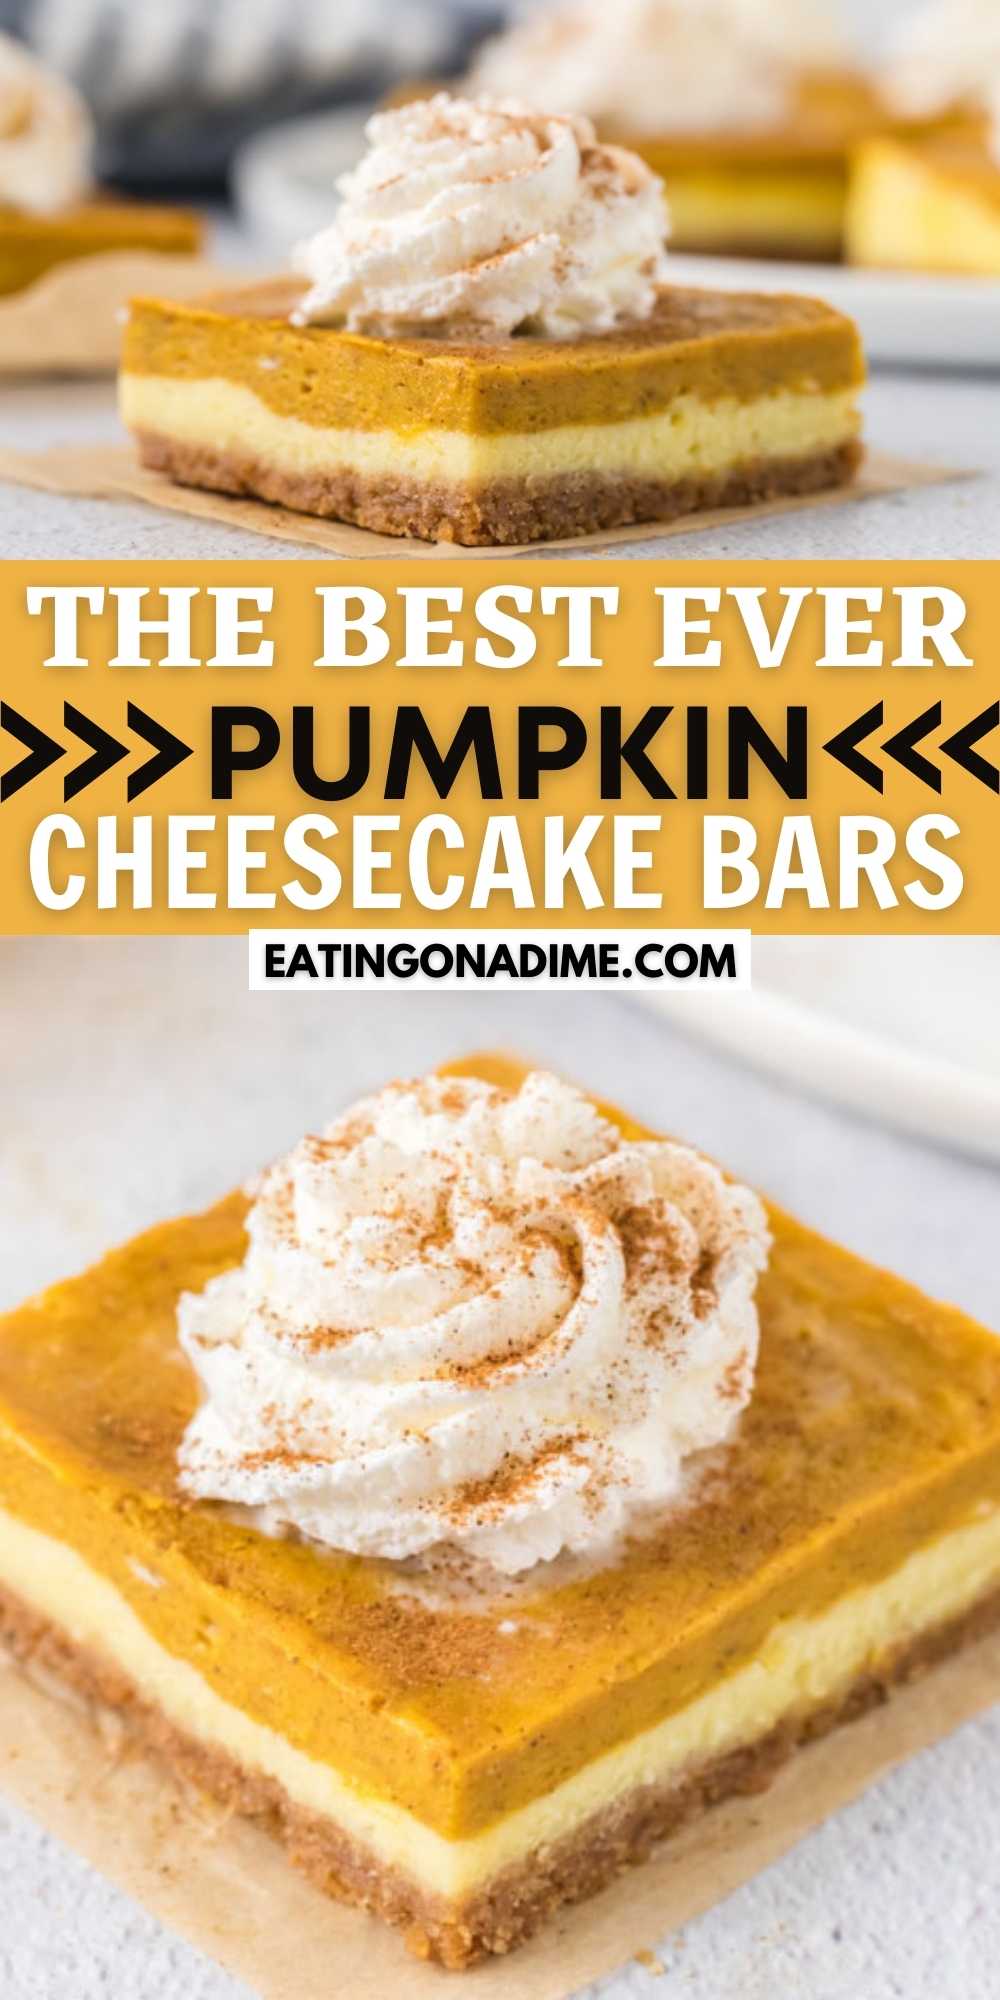 These easy to make pumpkin cheesecake bars are smooth, creamy & perfect for fall. With a graham cracker crust, cheesecake layer and pumpkin spice cheesecake layer, they're seriously delicious!  This is one of the best pumpkin recipes.  #eatingonadime #pumpkincheesecake #cheesecakebars #cheesecake #pumpkin #pumpkinspice #bars #easy #thanksgiving #fall
